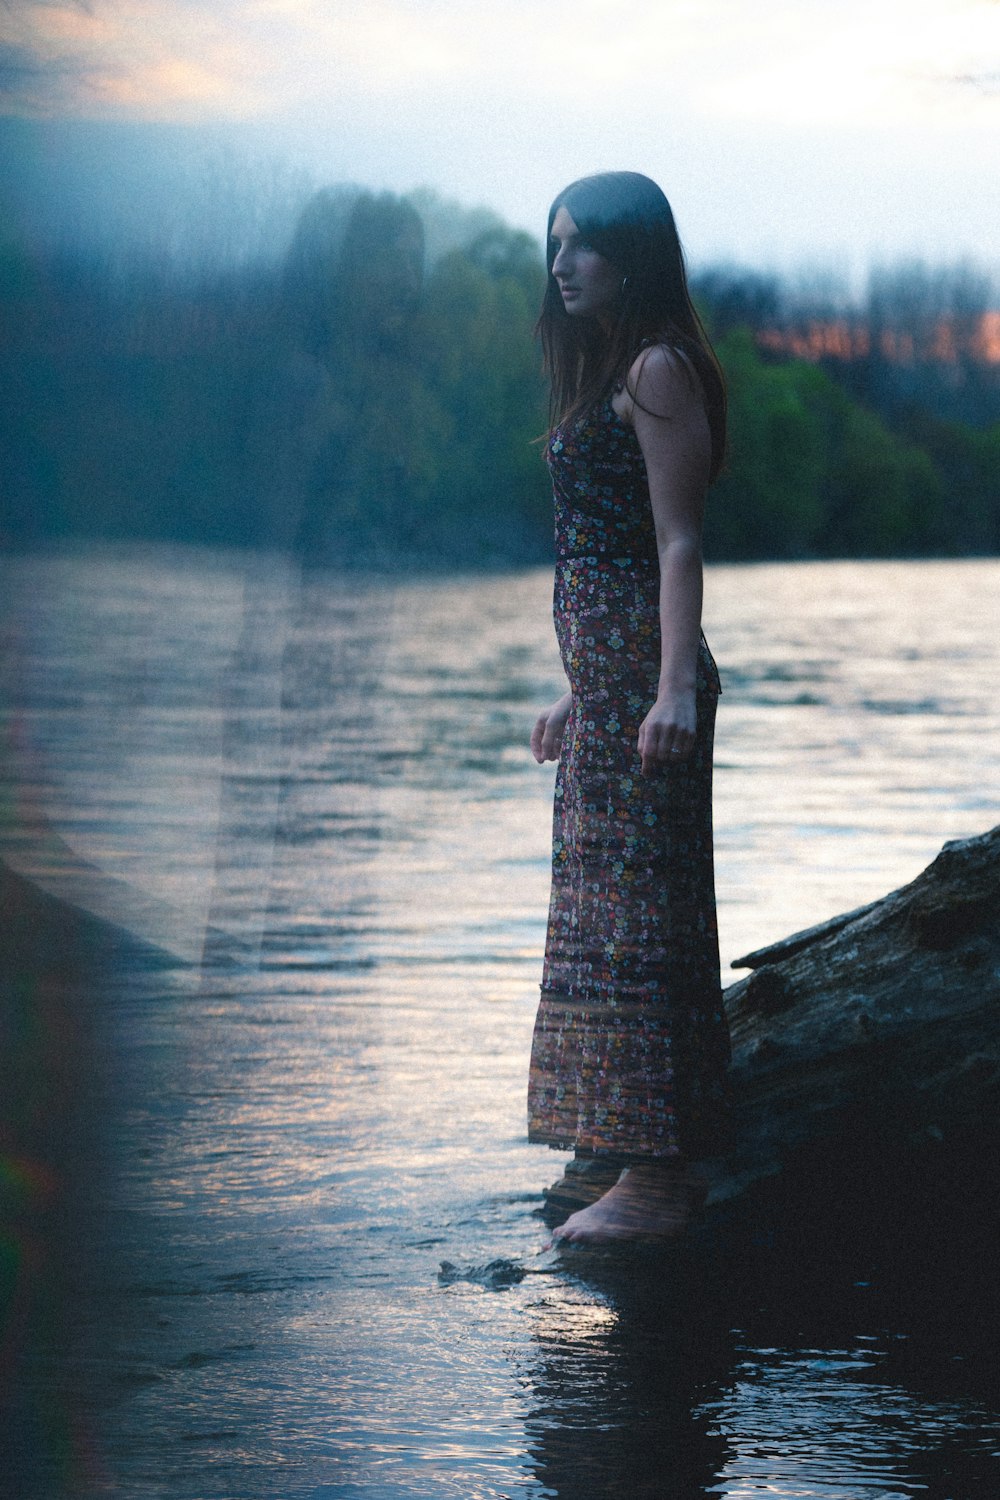 woman in black and white floral spaghetti strap dress standing on rock near body of water